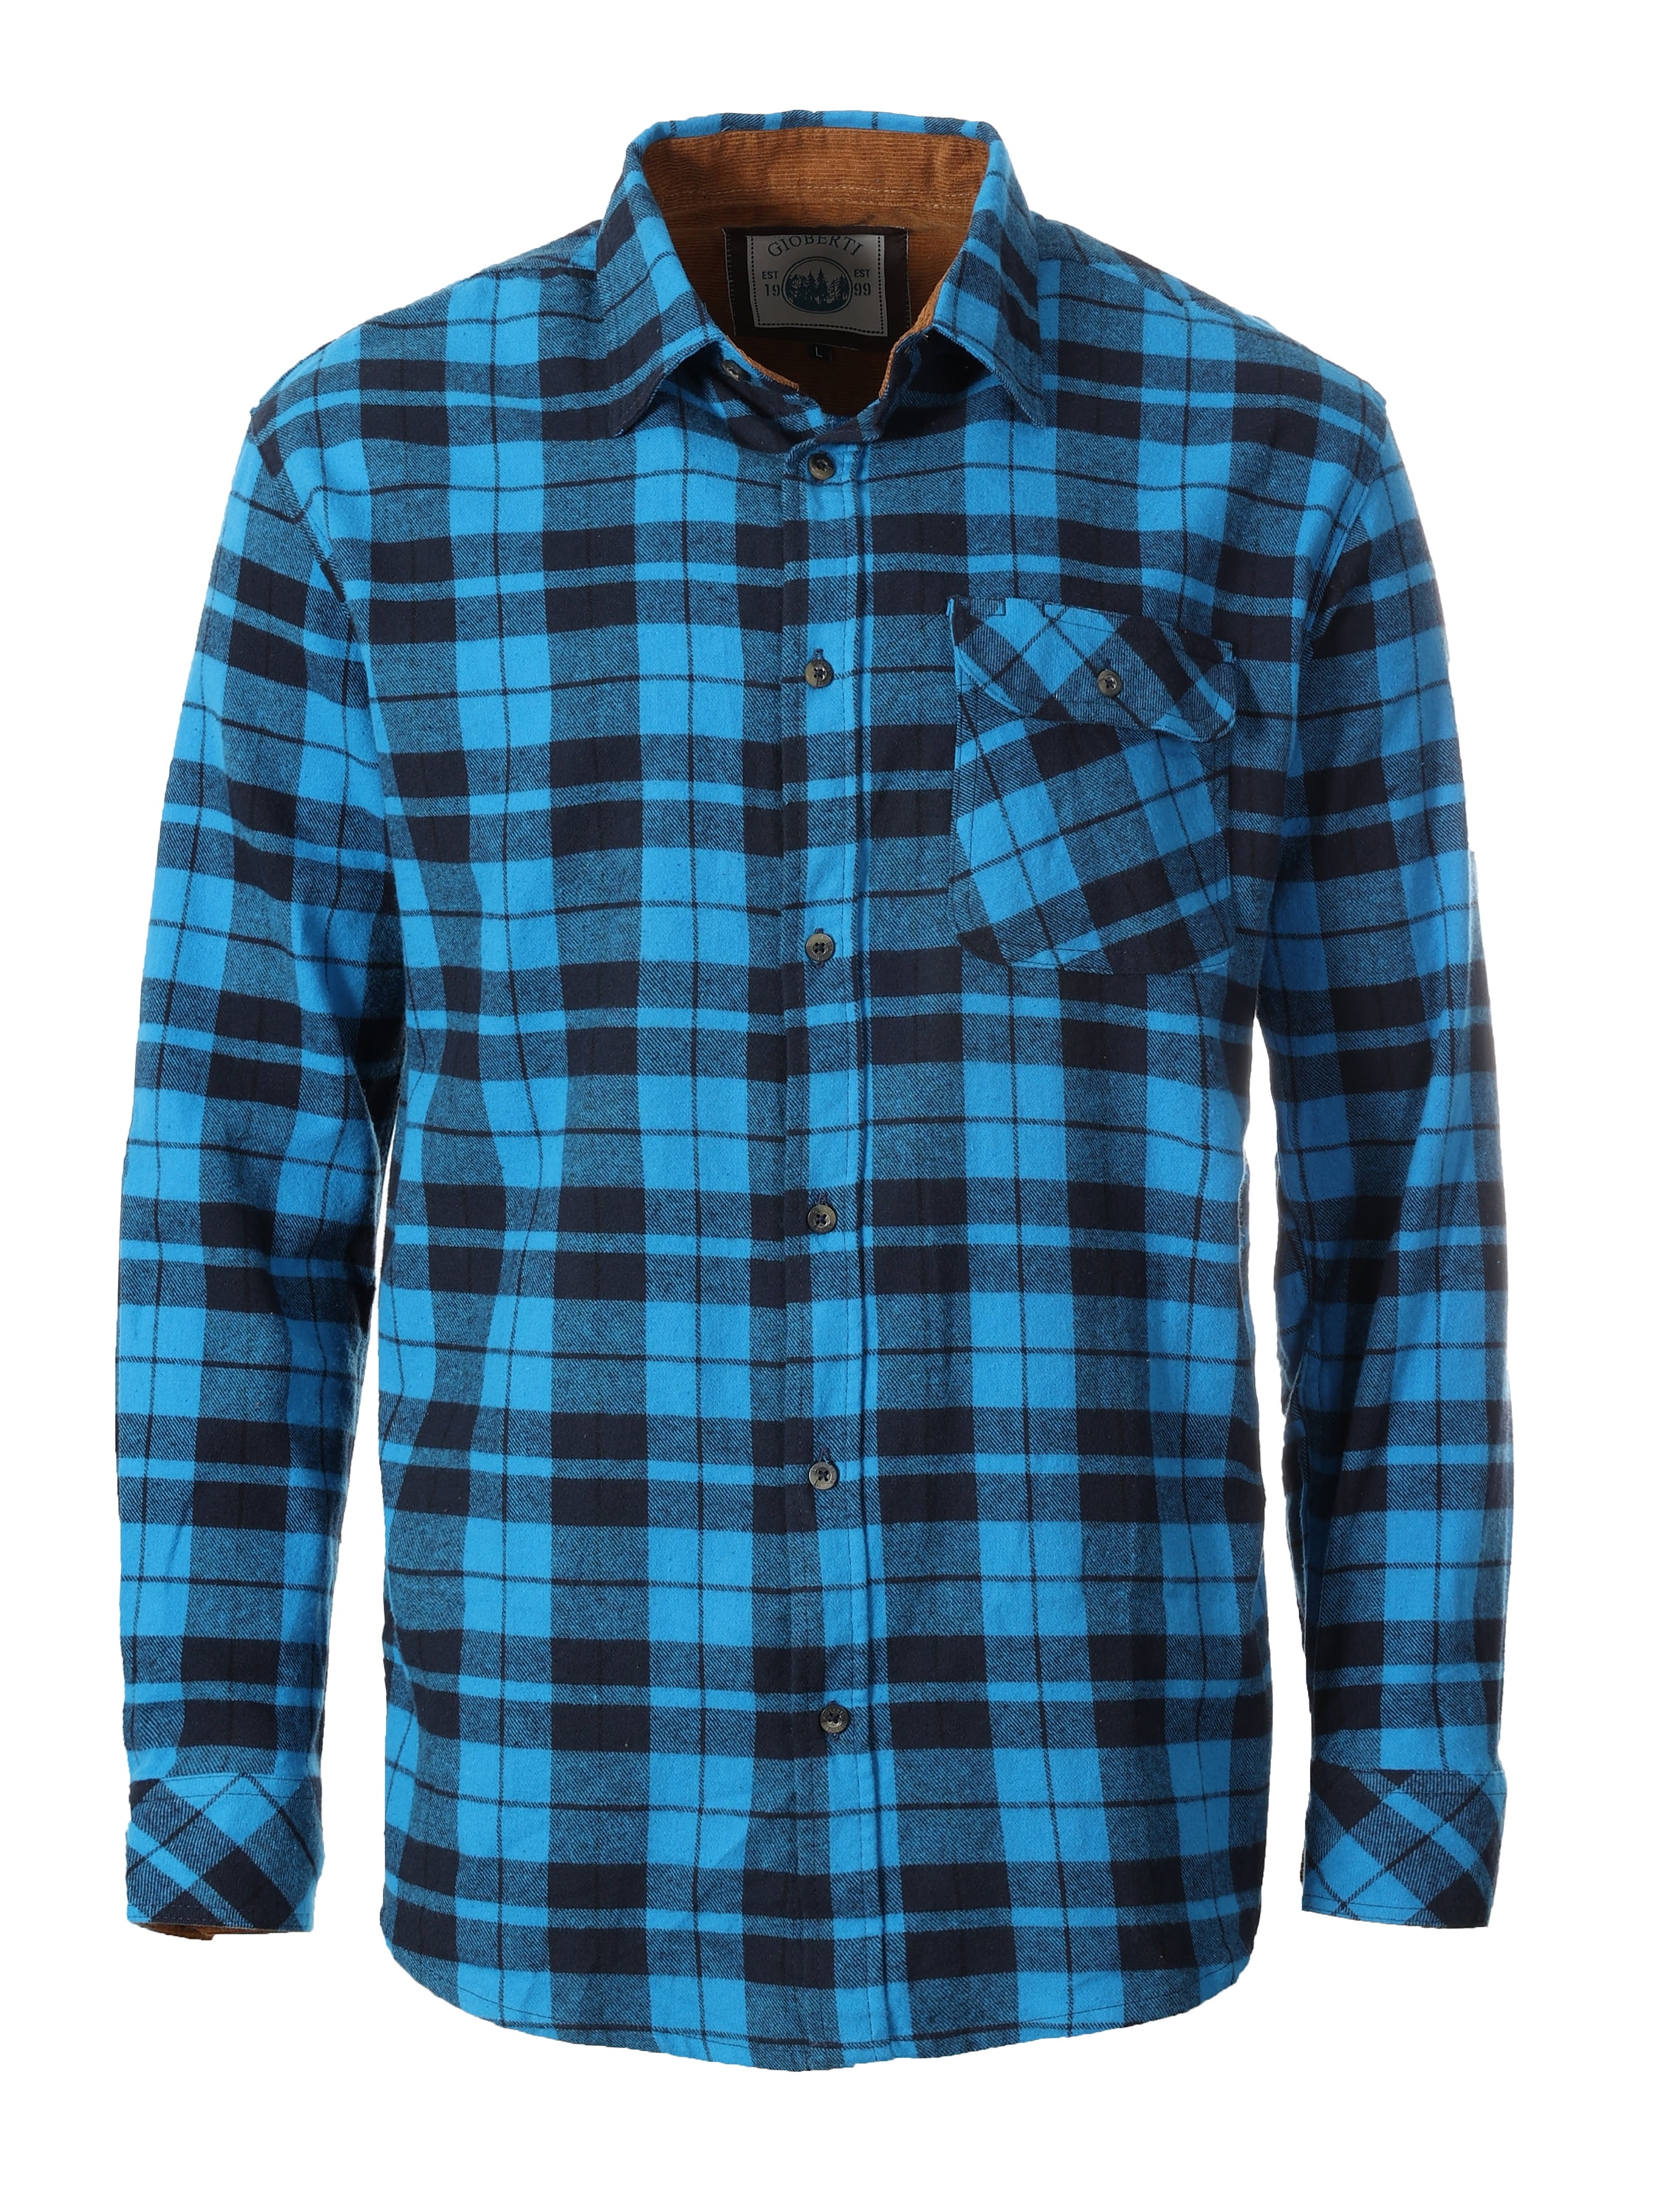 Gioberti Men's 100% Cotton Brushed Flannel Plaid Checkered Shirt with ...